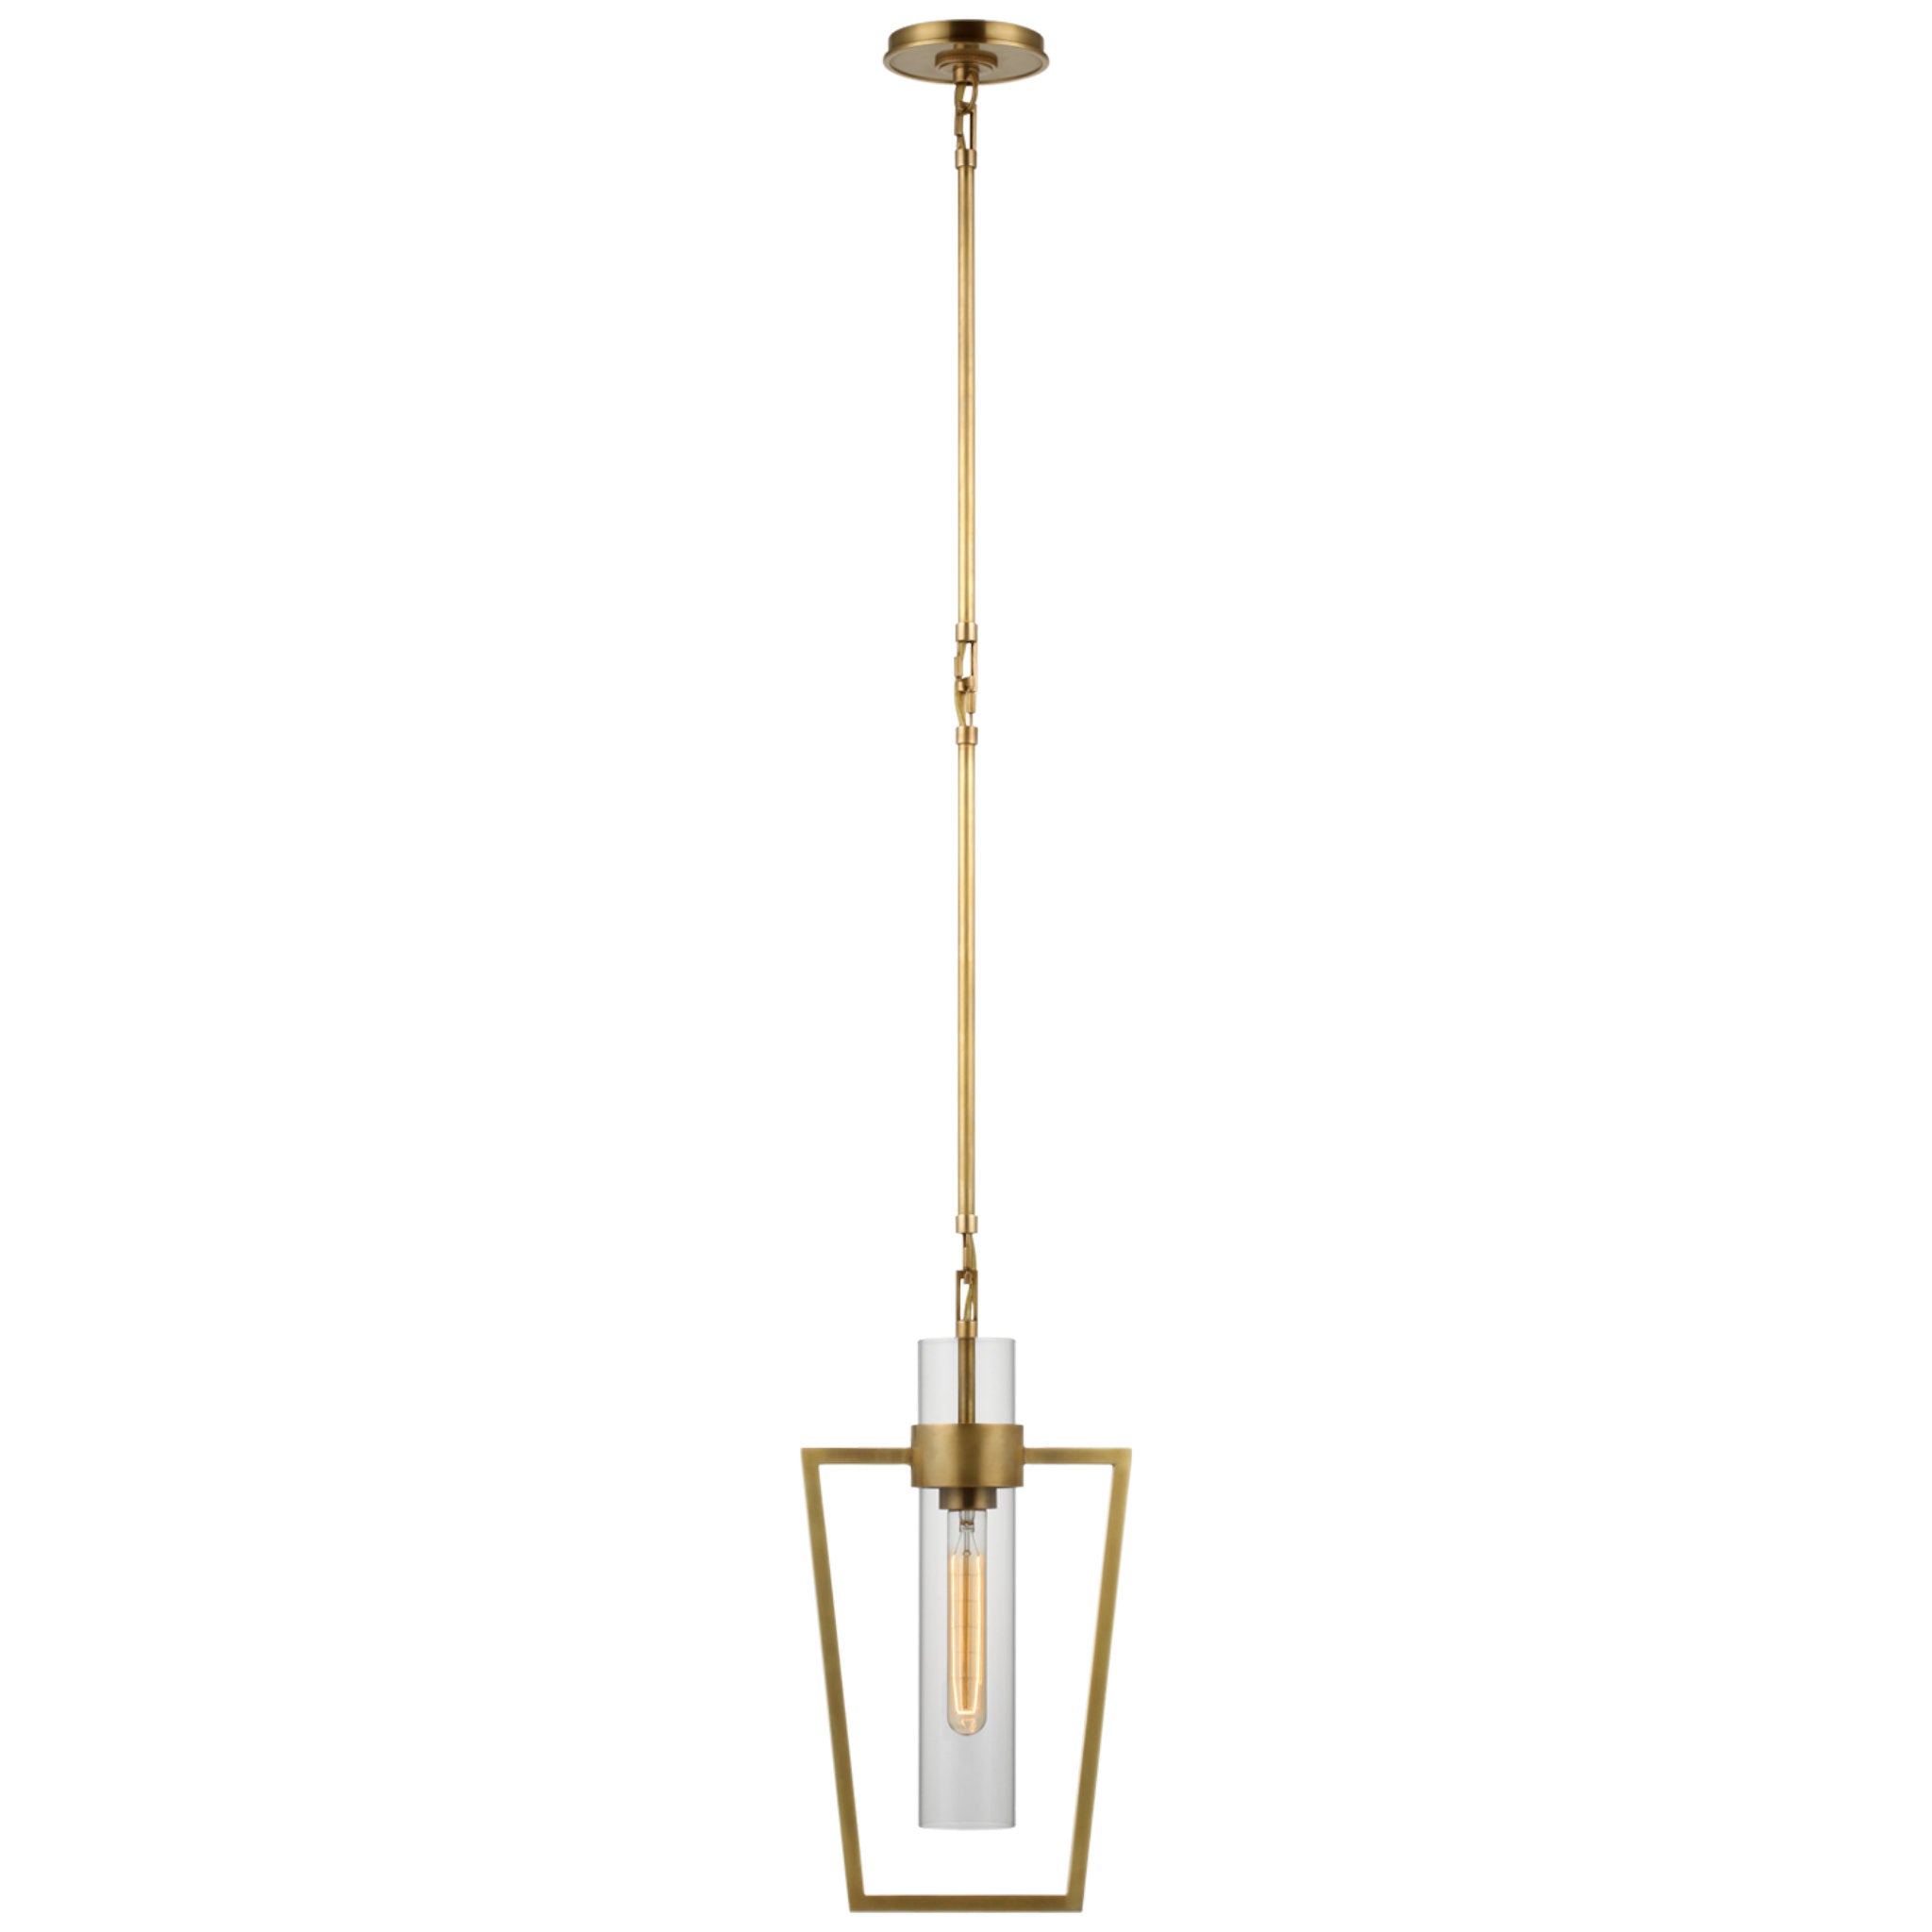 Ian K. Fowler Presidio Petite Caged Pendant in Hand-Rubbed Antique Brass with Clear Glass